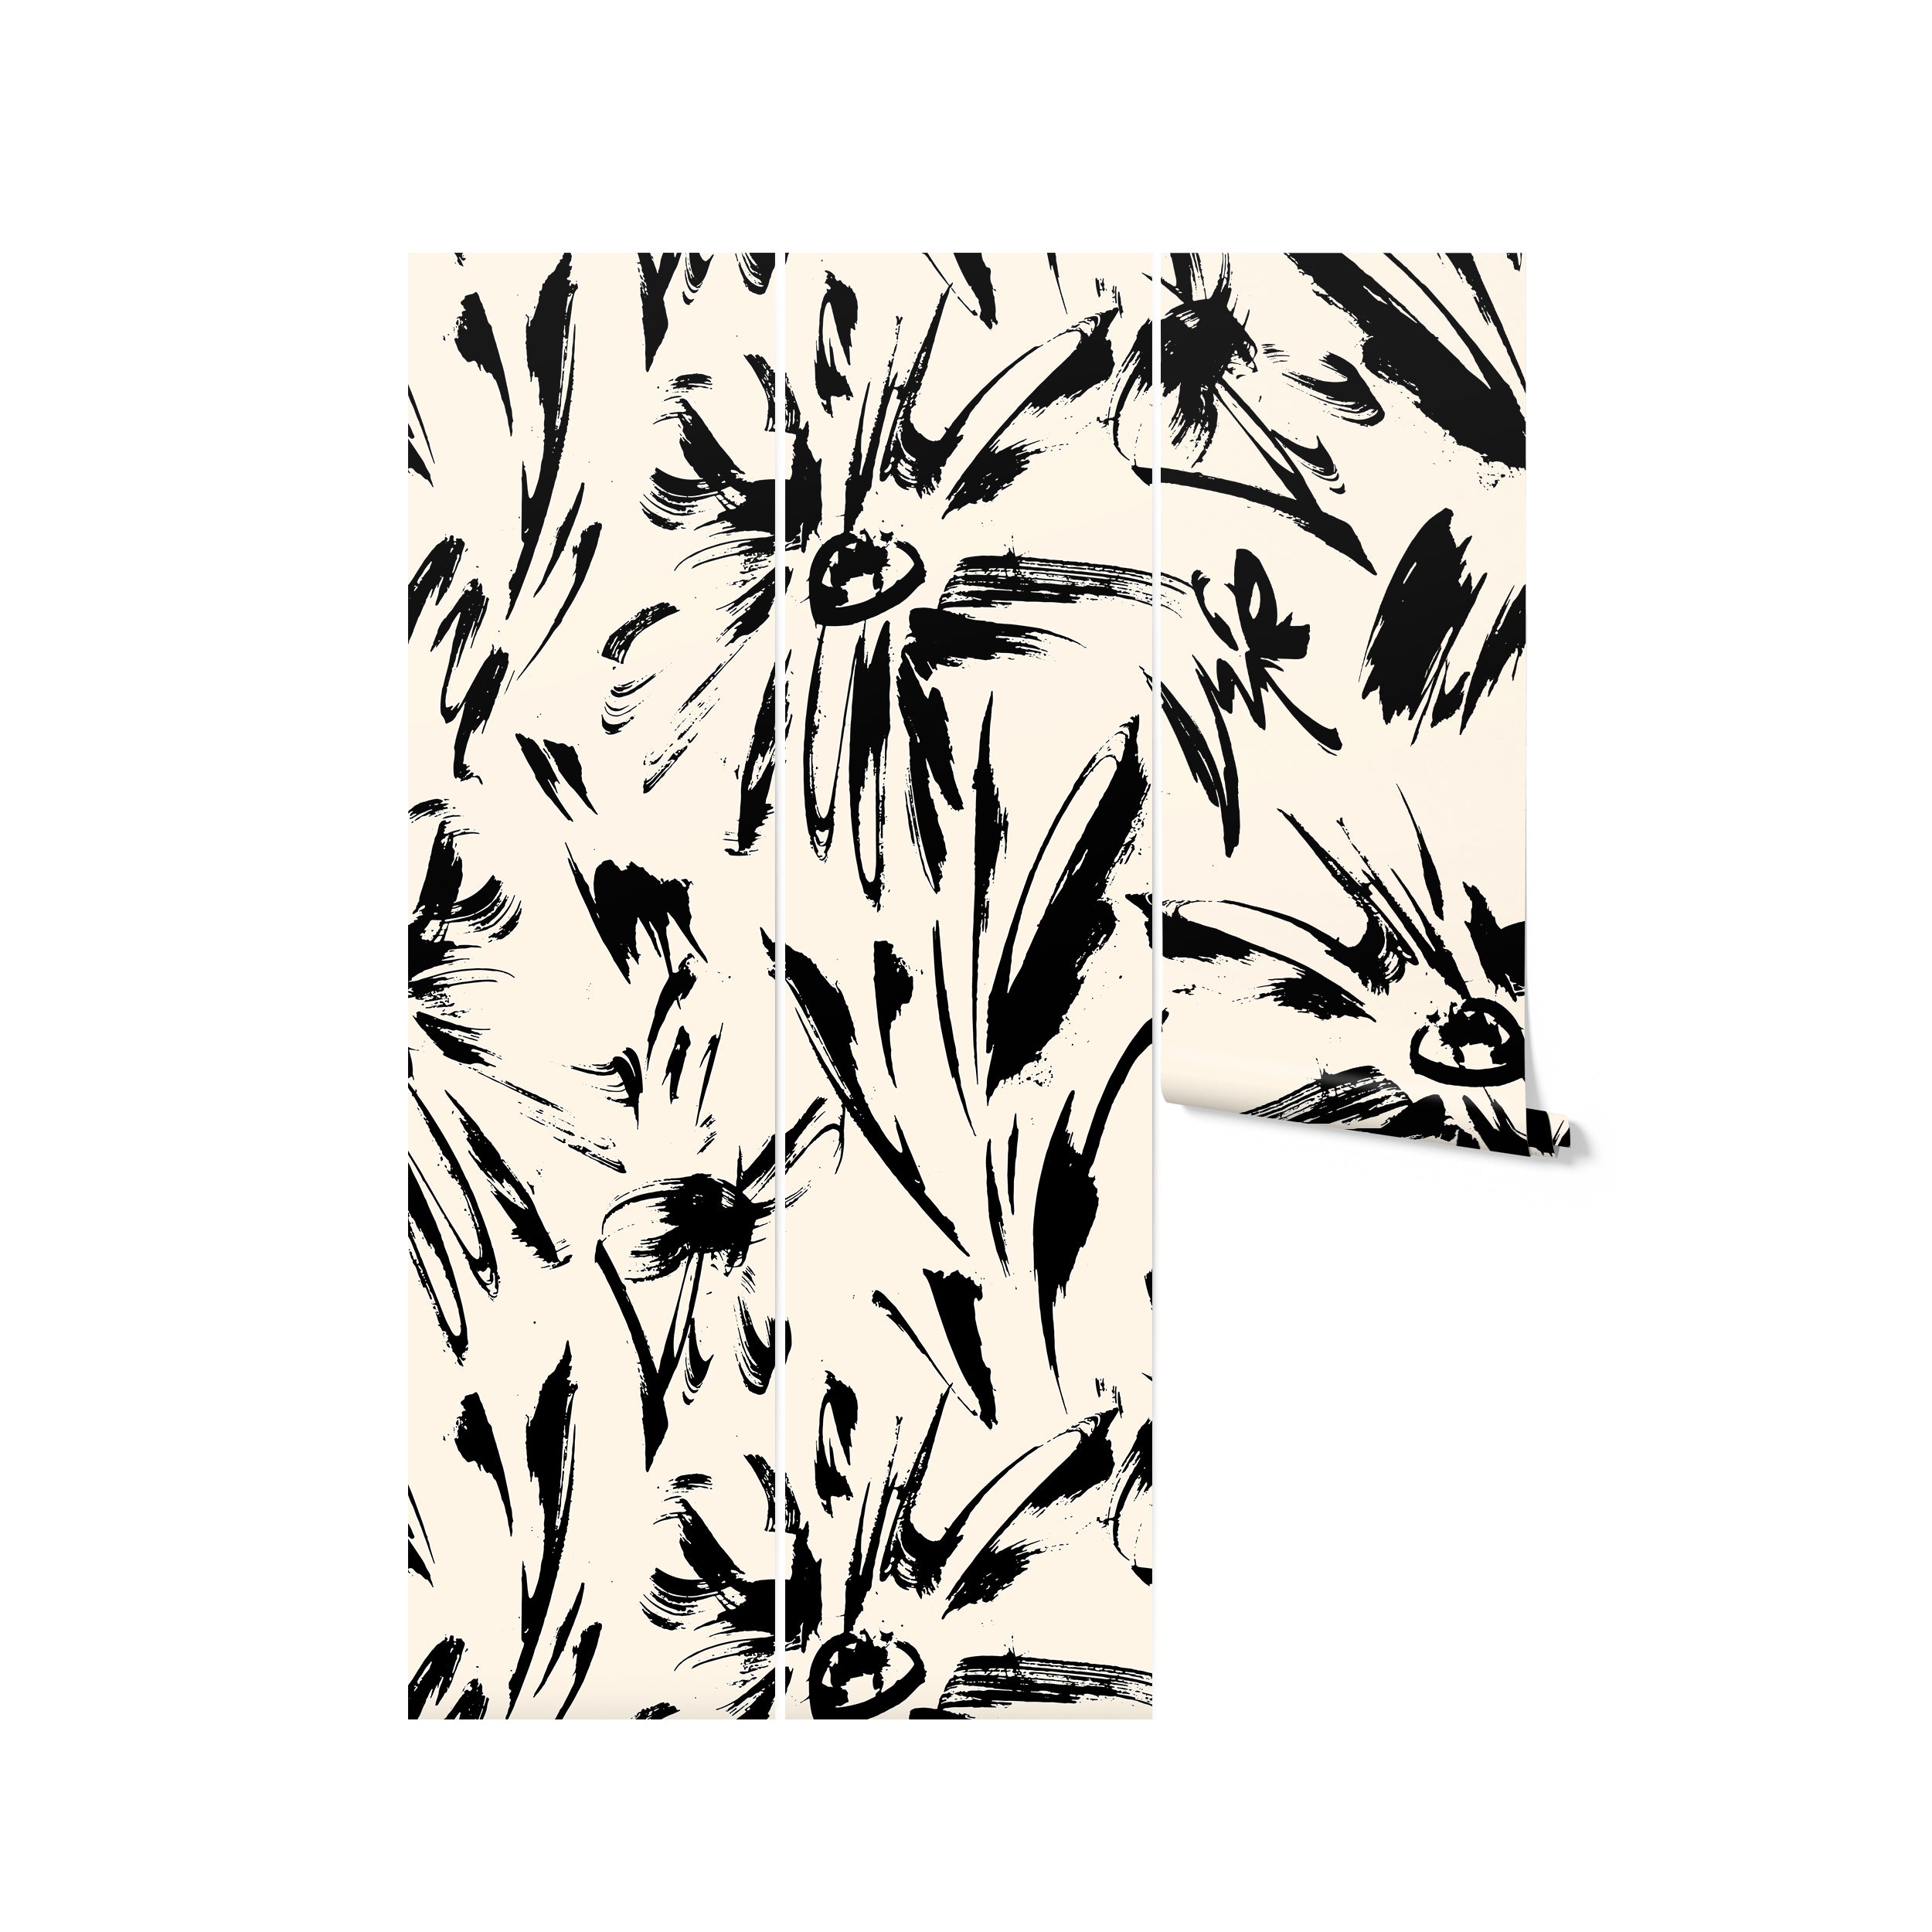 A roll of Modern Floral Sketch Wallpaper - 75", partially unrolled to reveal its striking pattern of black abstract floral designs on a white background. This wallpaper is ideal for making a bold statement in contemporary or avant-garde interior designs.